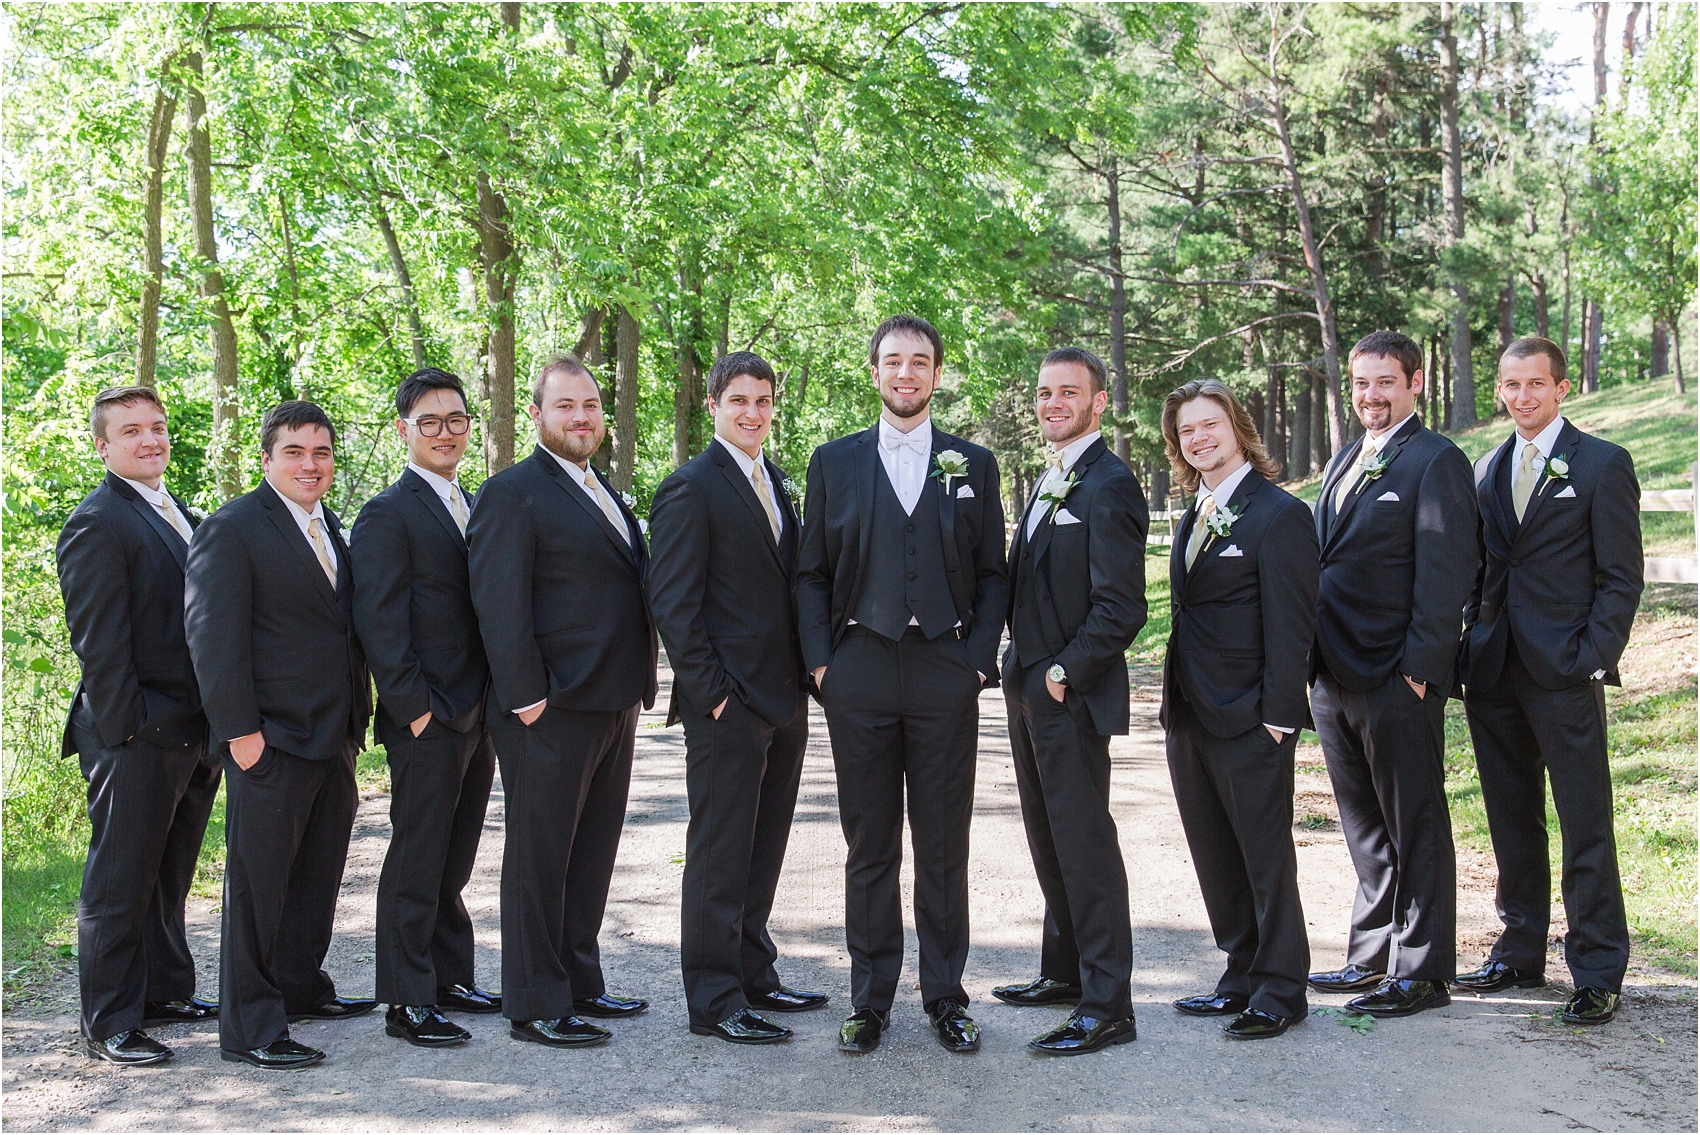 lord-of-the-rings-inspired-wedding-photos-at-crystal-gardens-in-howell-mi-by-courtney-carolyn-photography_0060.jpg